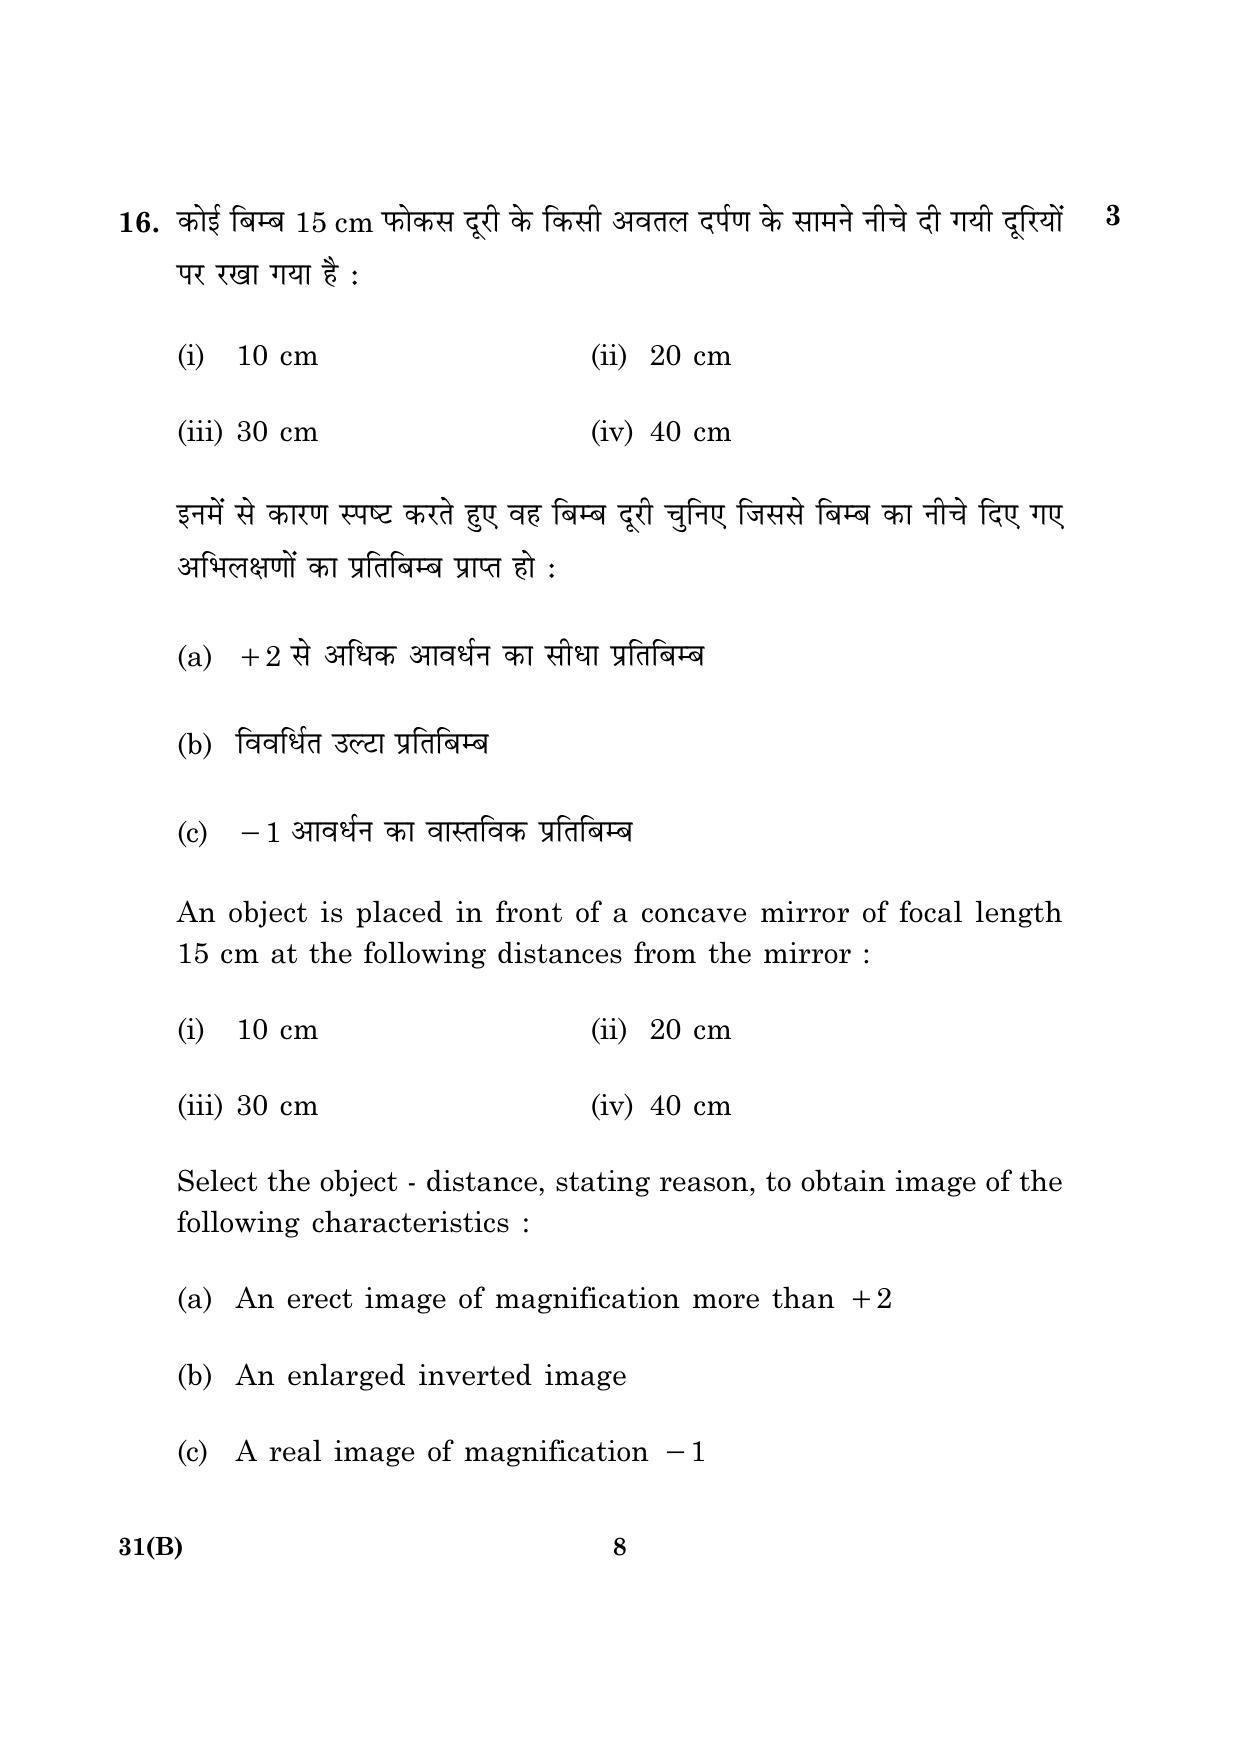 CBSE Class 10 031(B) Science 2016 Question Paper - Page 8